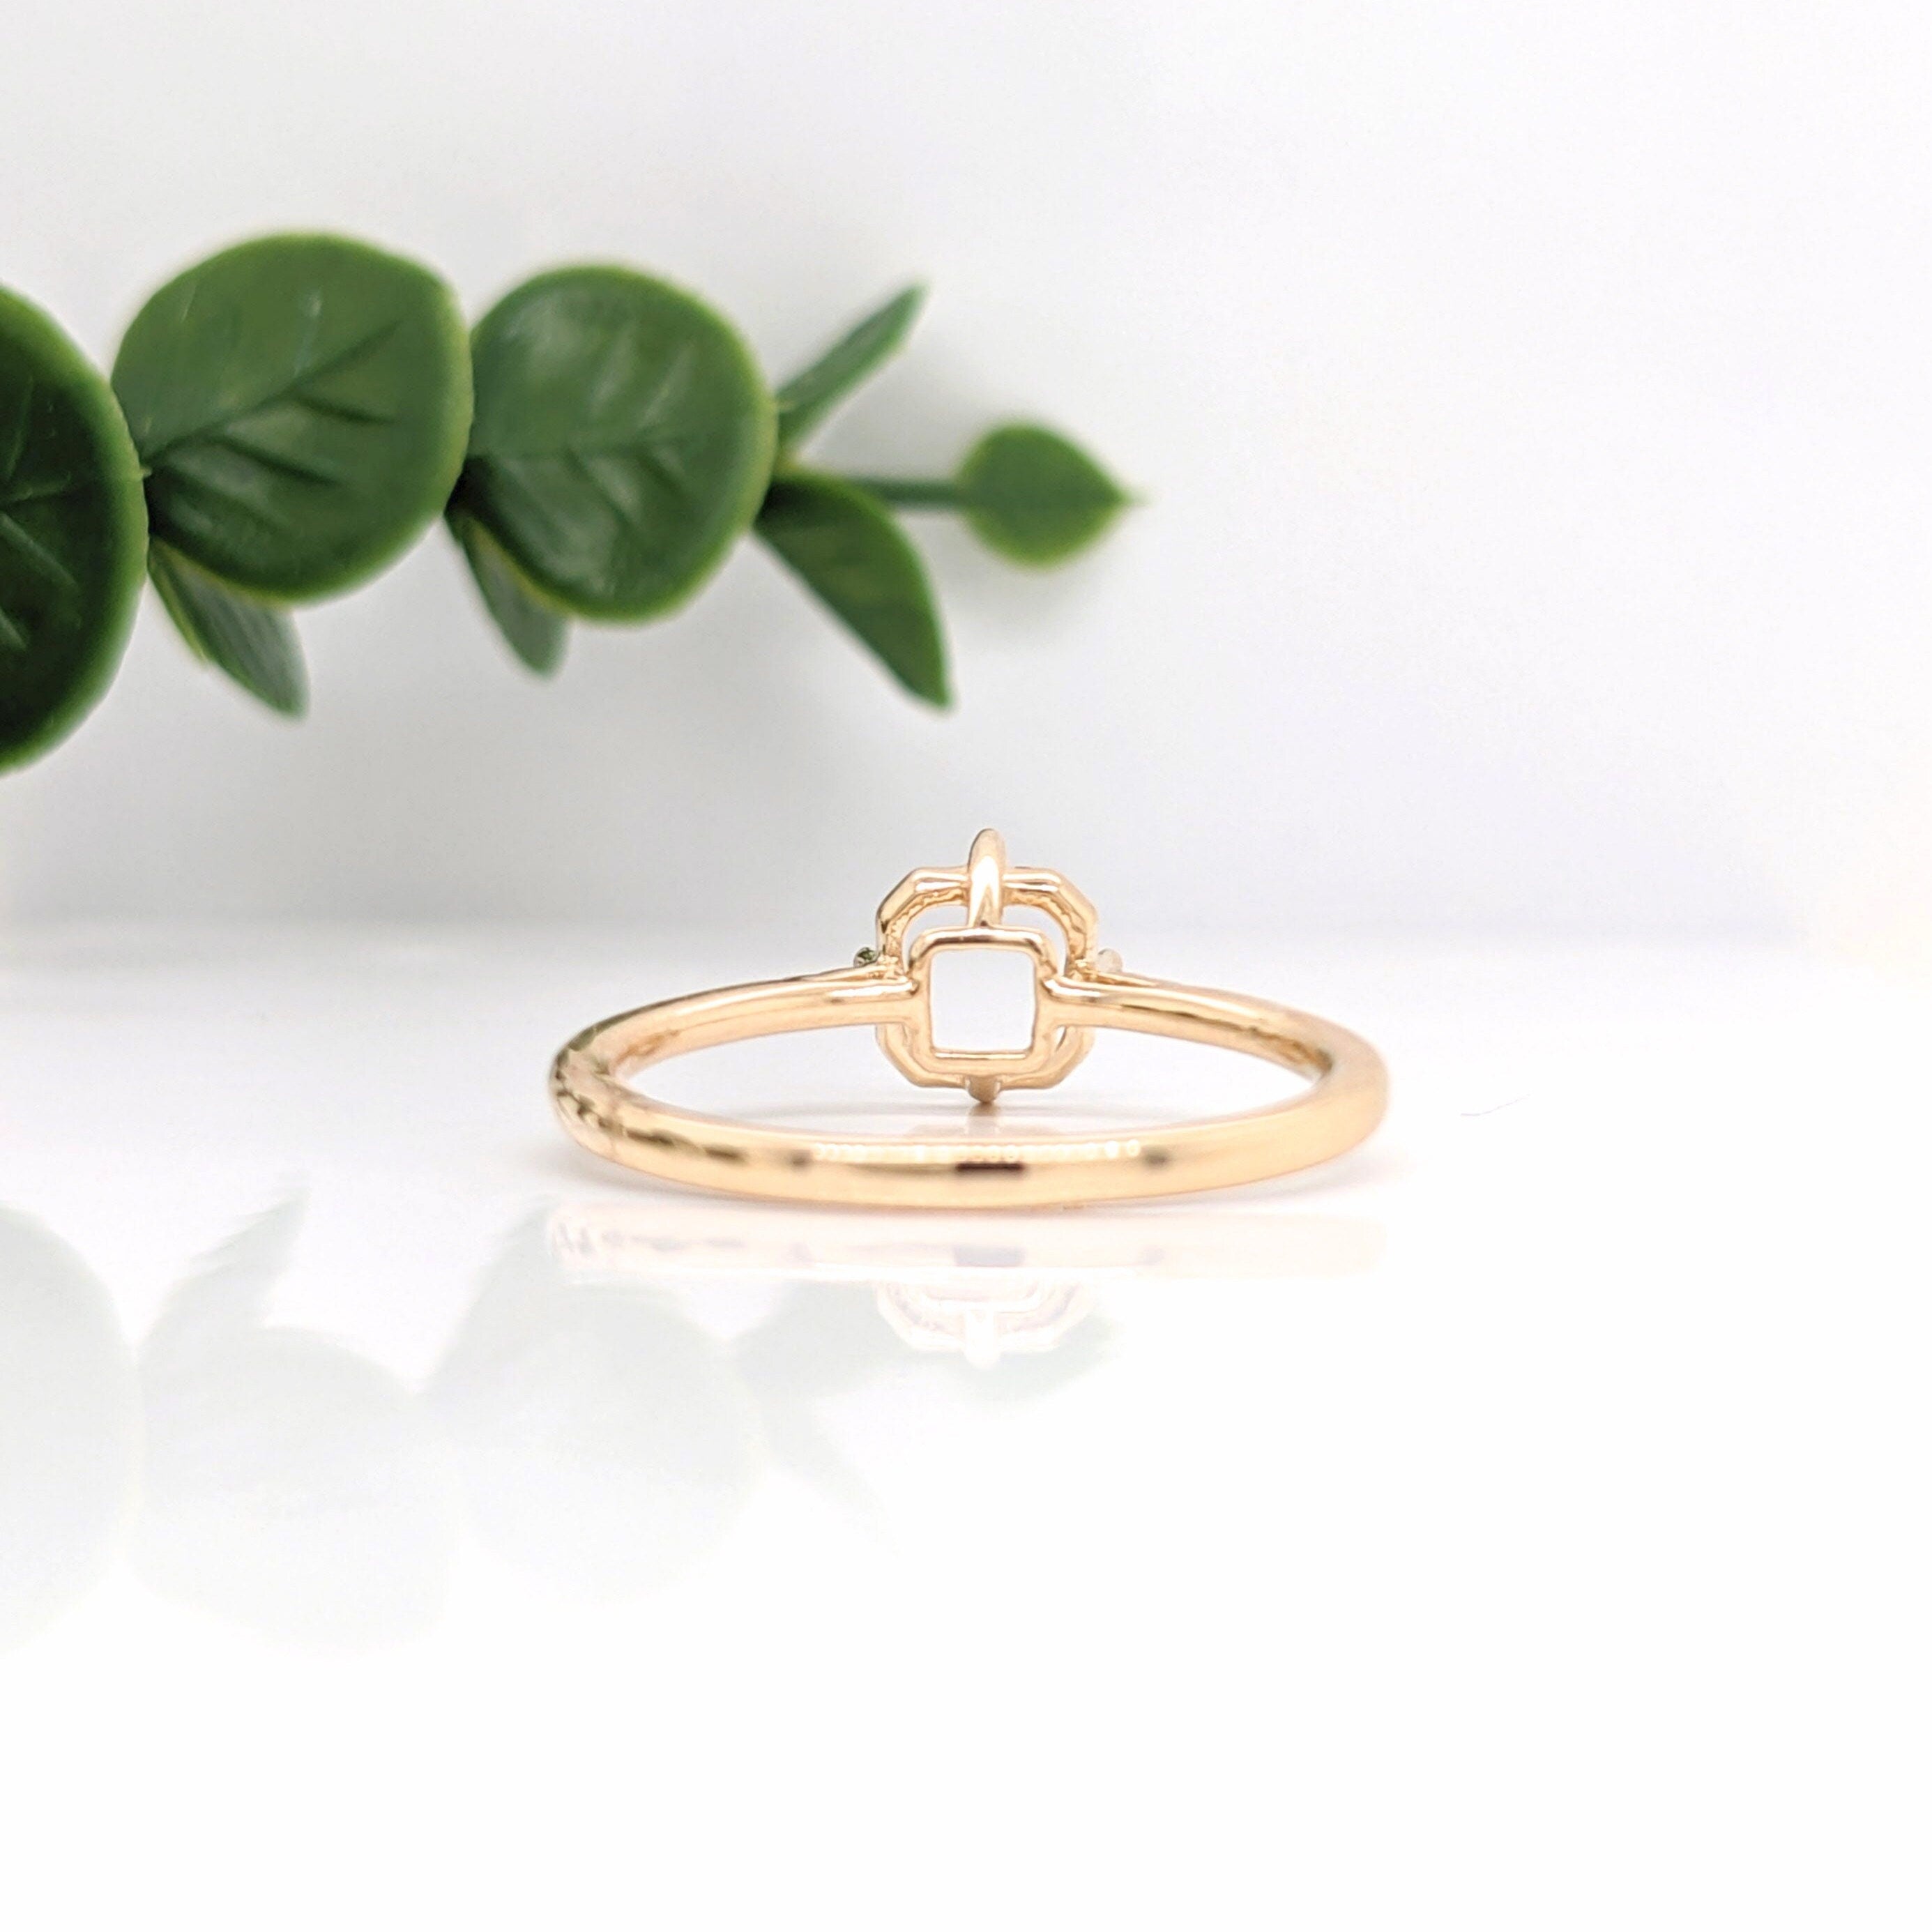 Statement Rings-Minimal Ring Setting in 14K Gold with a dainty diamond band | Asscher Cut 6mm | Compass Prongs | Minimalist | Dainty Ring | Customizable - NNJGemstones